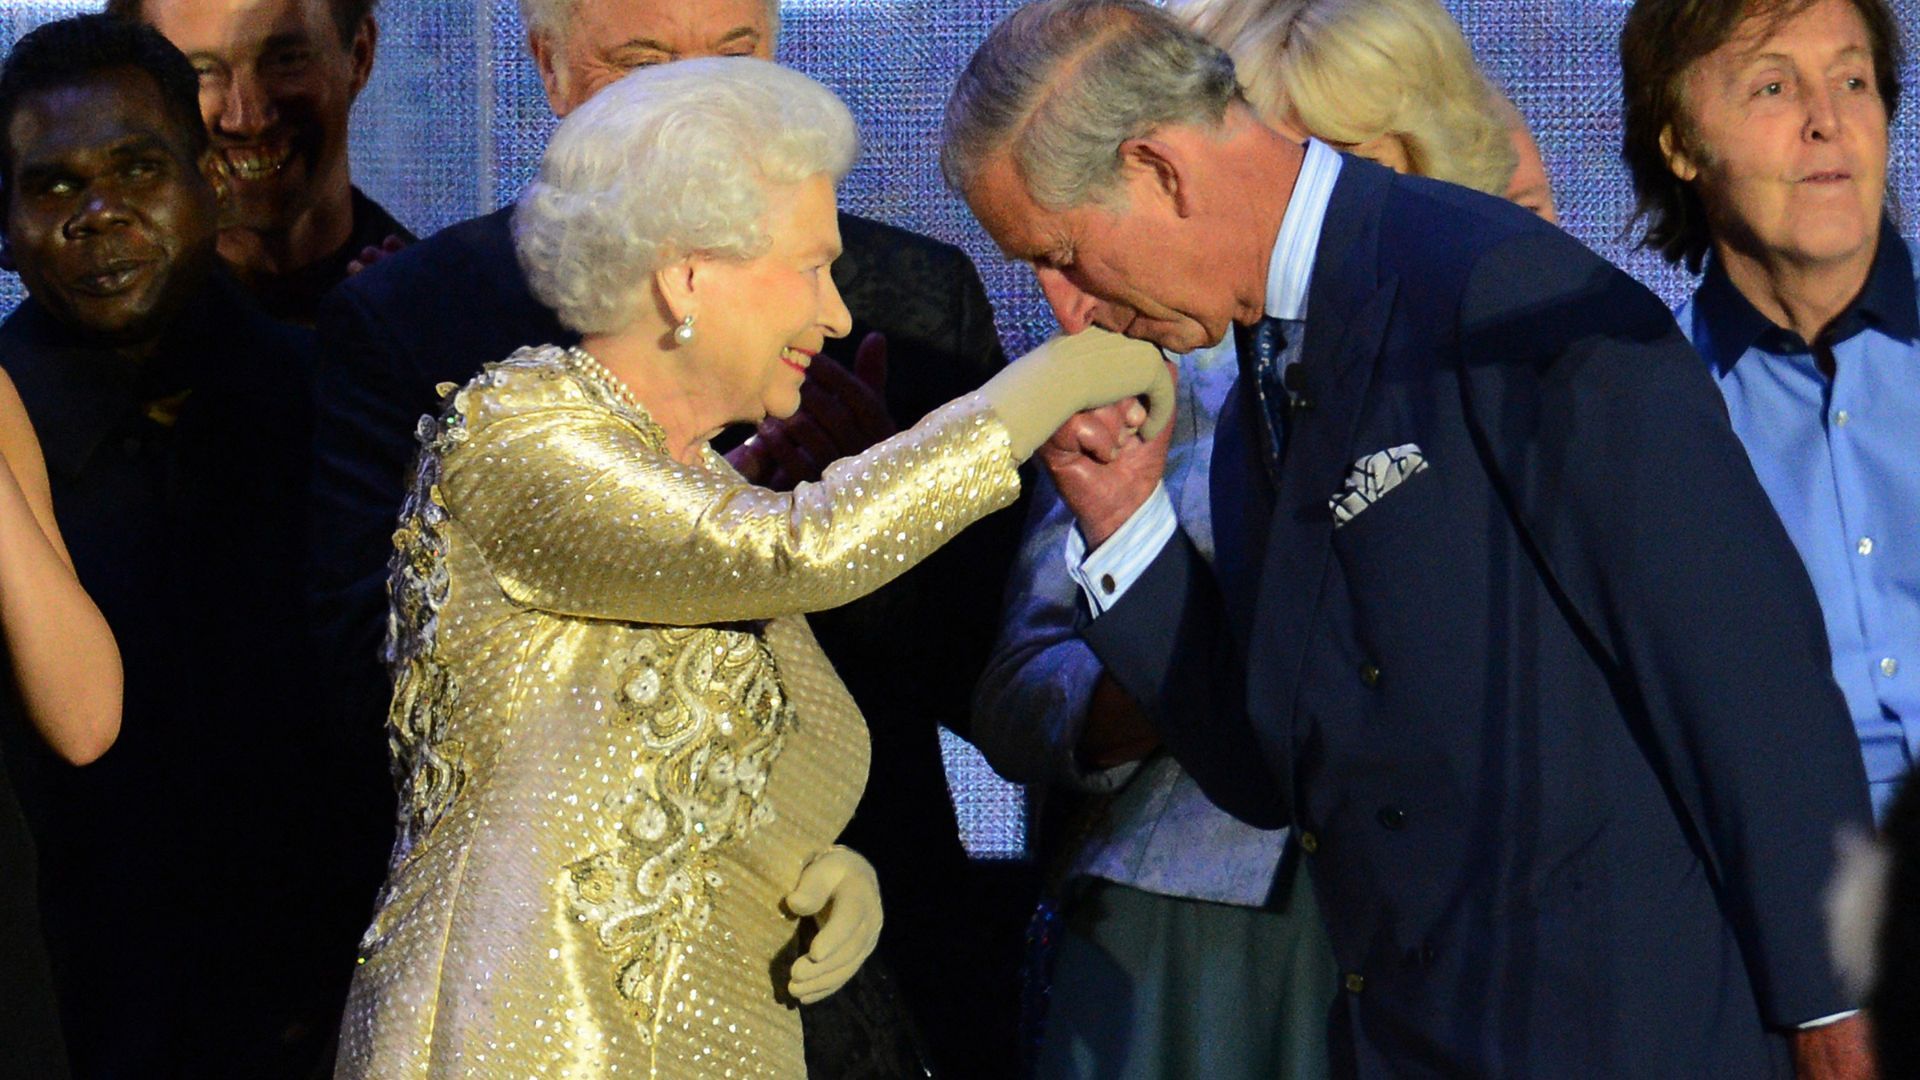 <p>                     One of the biggest events of the century for the British public was Queen Elizabeth II’s Diamond Jubilee which marked her 70th anniversary of being on the throne. Charles’s speech was of course incredibly moving however what made this a memorable event was how he began his speech - with an endearing “Your Majesty, mummy.”                   </p>